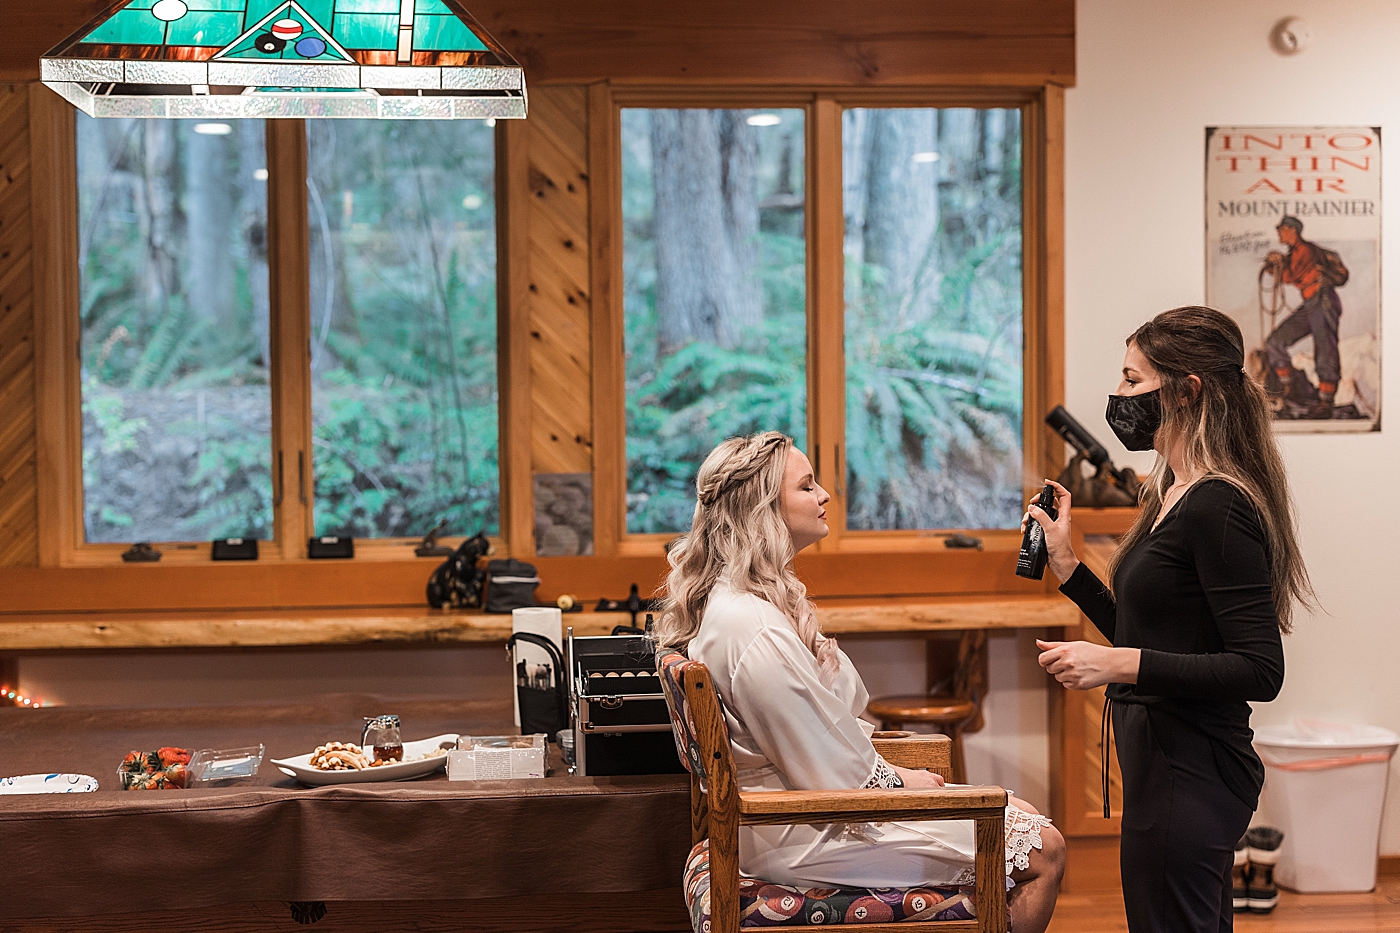 Bride getting ready photos before elopement. Photo by Megan Montalvo Photography.